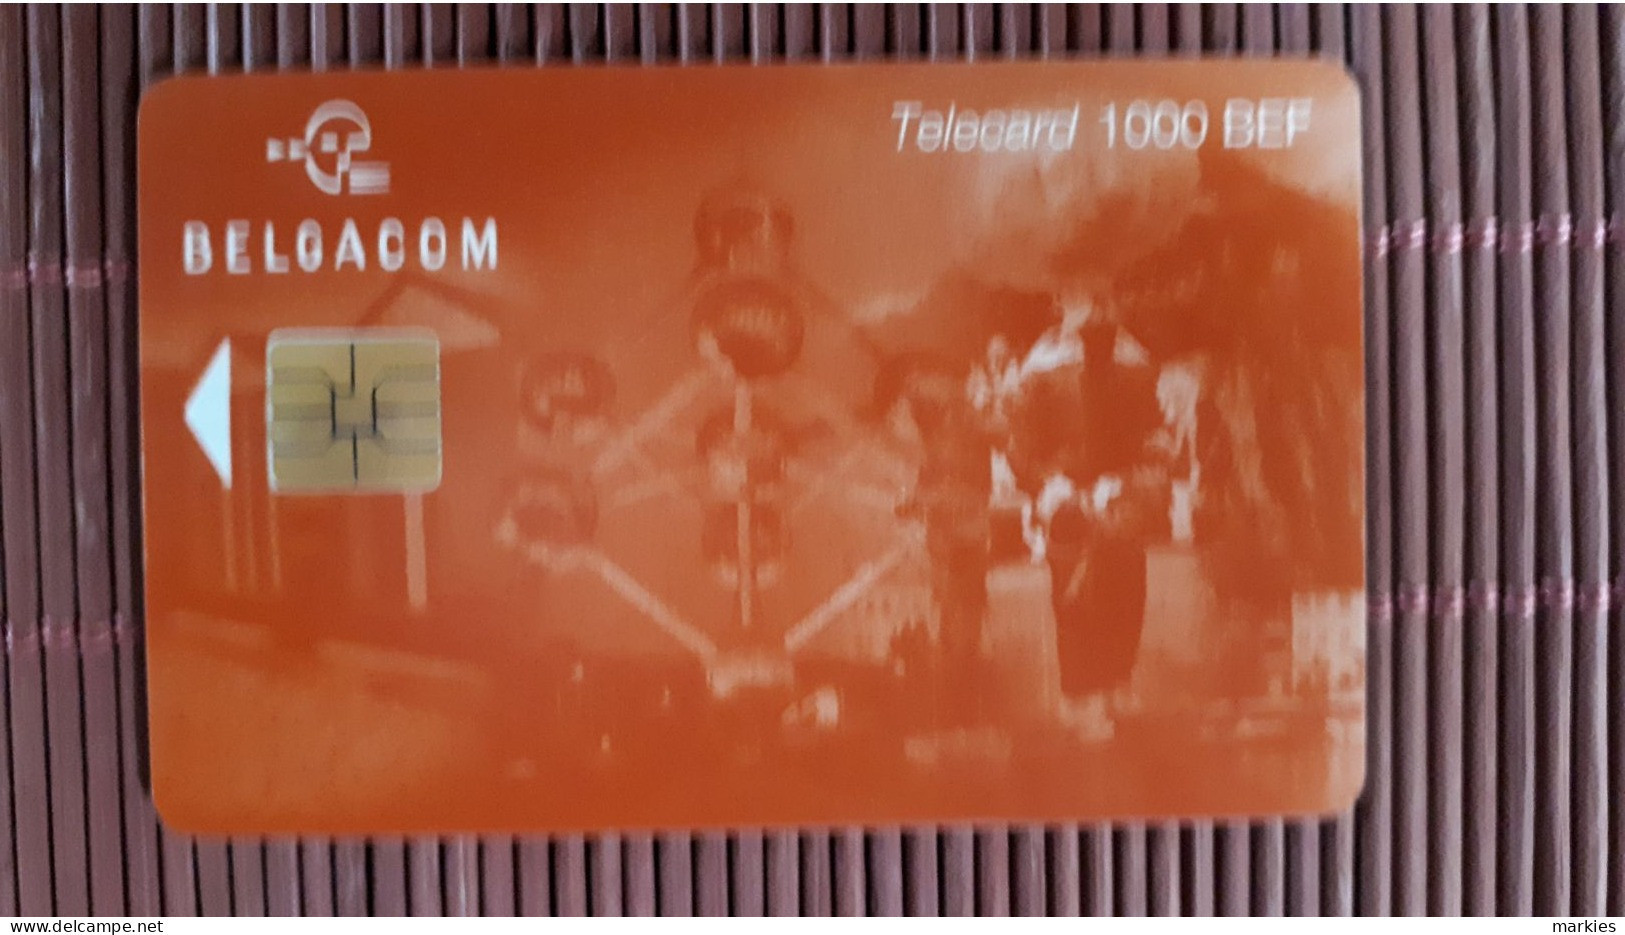 Atomium Phonecard  1000 BEF  HI 31.12..2001 Very Rare Catalogue 43,38 Euro Used Only 5000 Ex Made  Rare - Con Chip